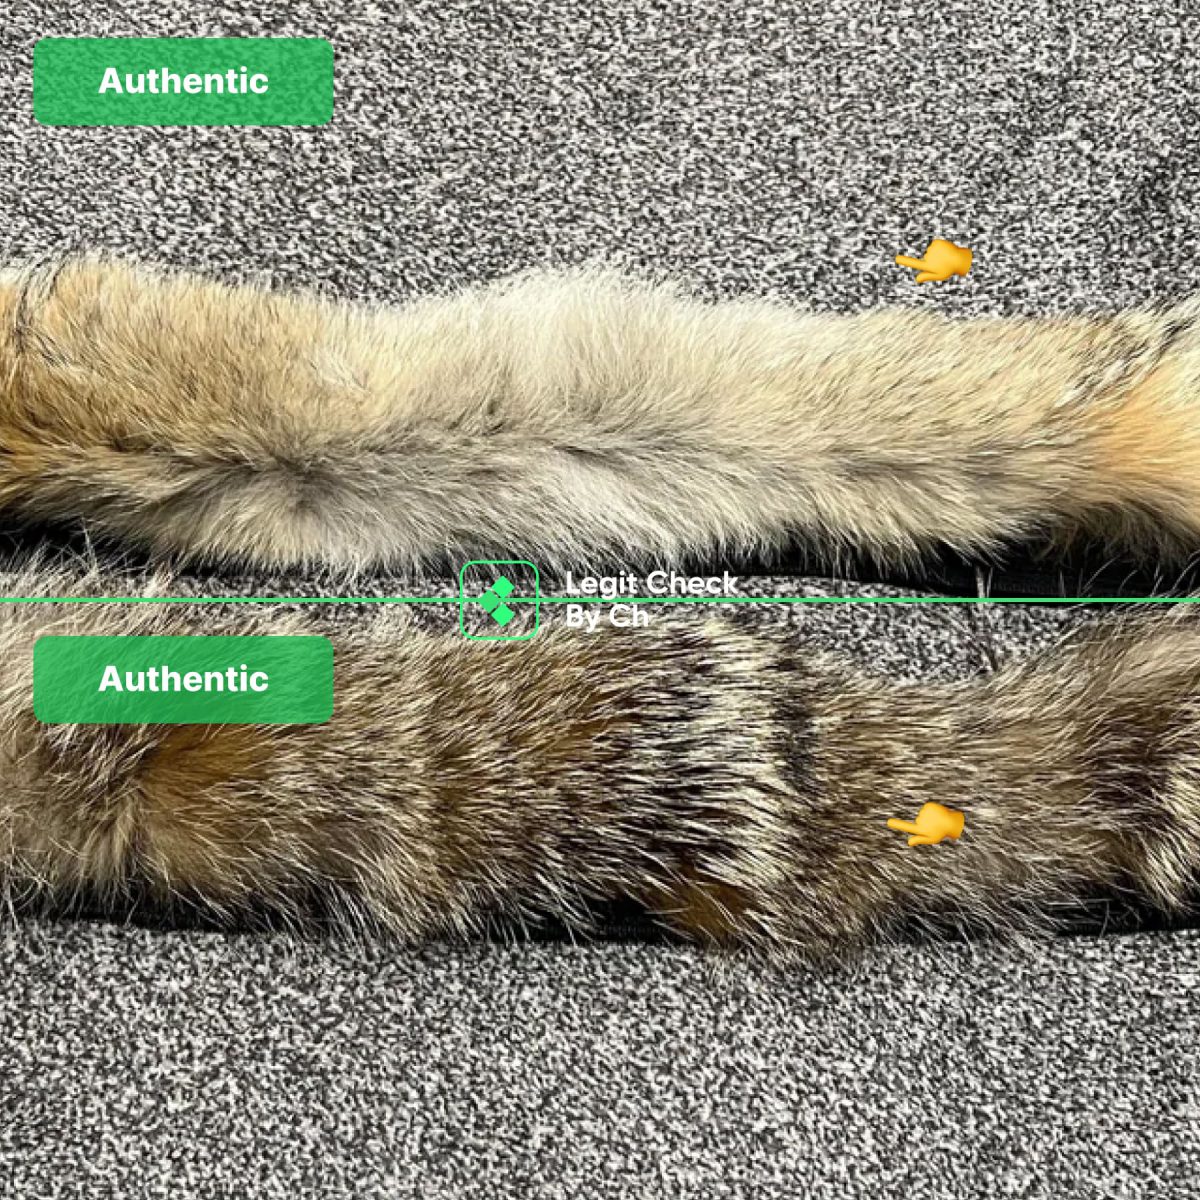 Two authentic examples of Canada Goose fur